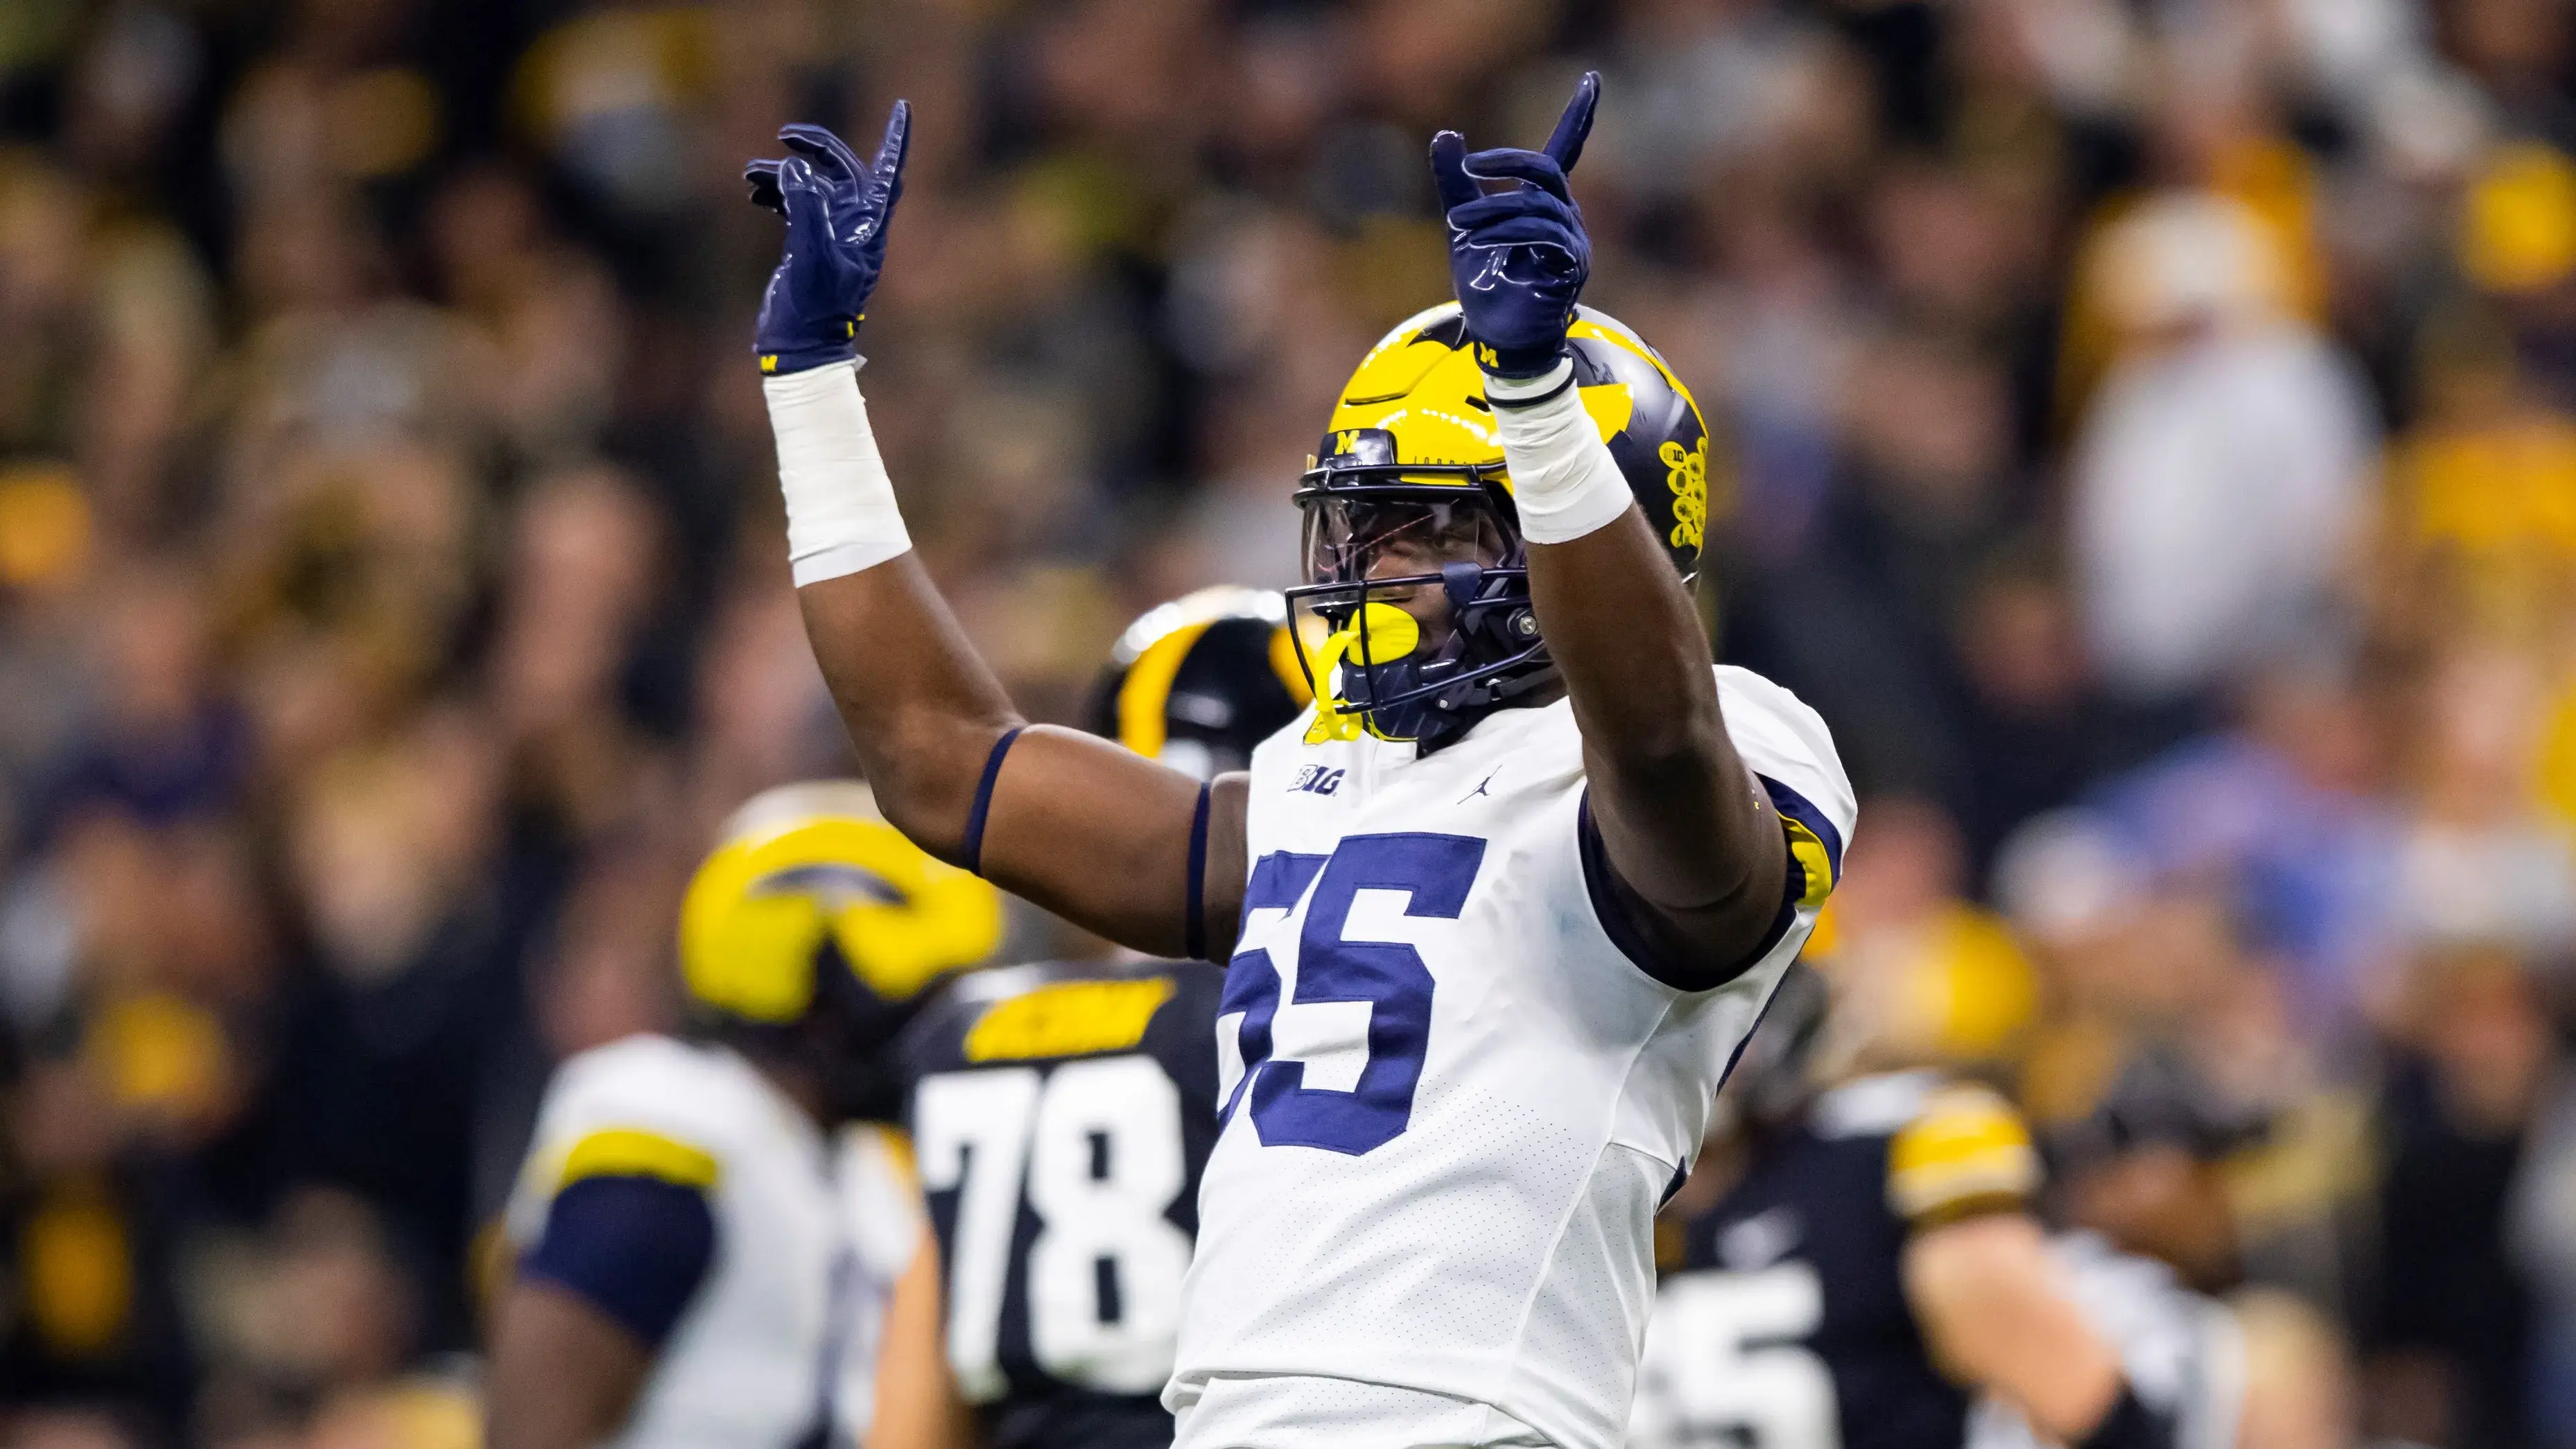 Michigan Wolverines linebacker David Ojabo (55) celebrates a play against the Iowa Hawkeyes in the Big Ten Conference championship game at Lucas Oil Stadium. / Mark J. Rebilas-USA TODAY Sports